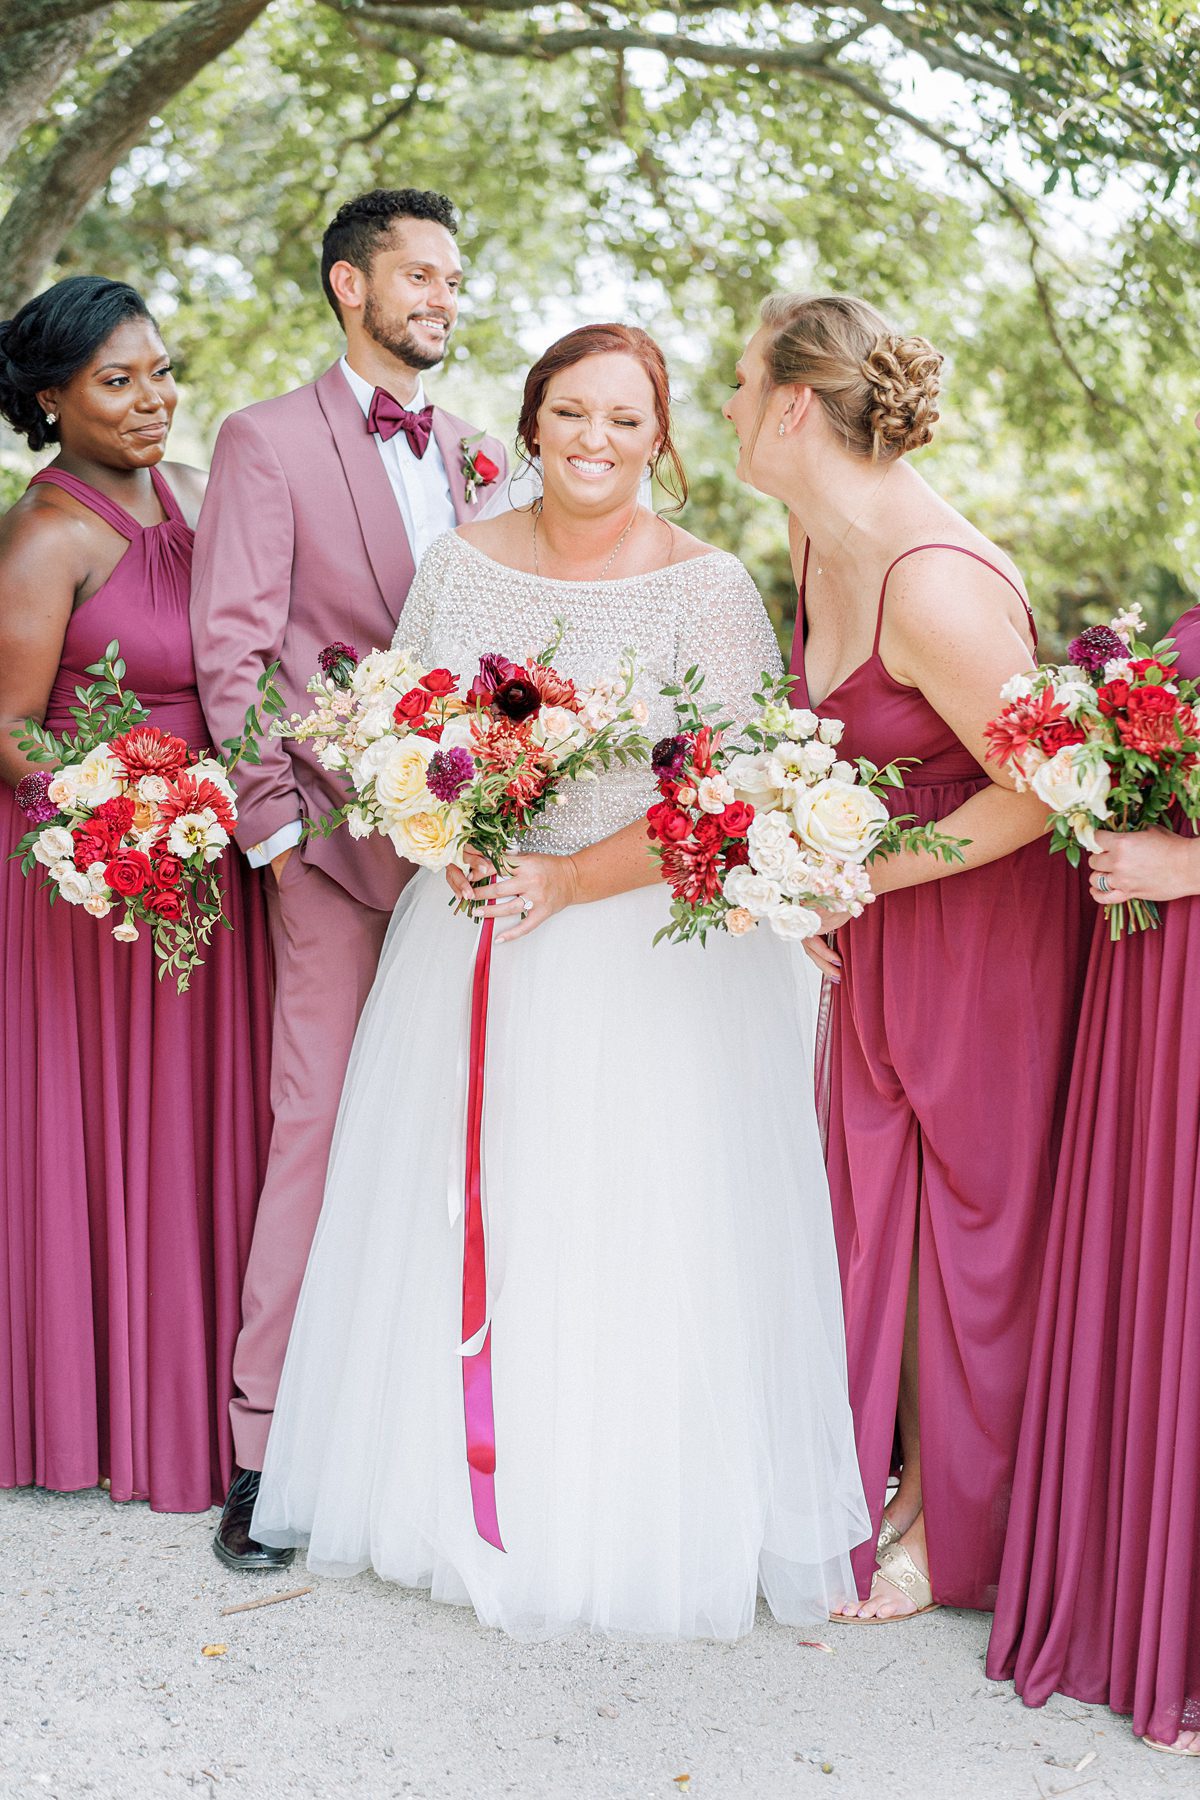 what are the most important questions to ask a wedding photographer for your Charleston wedding